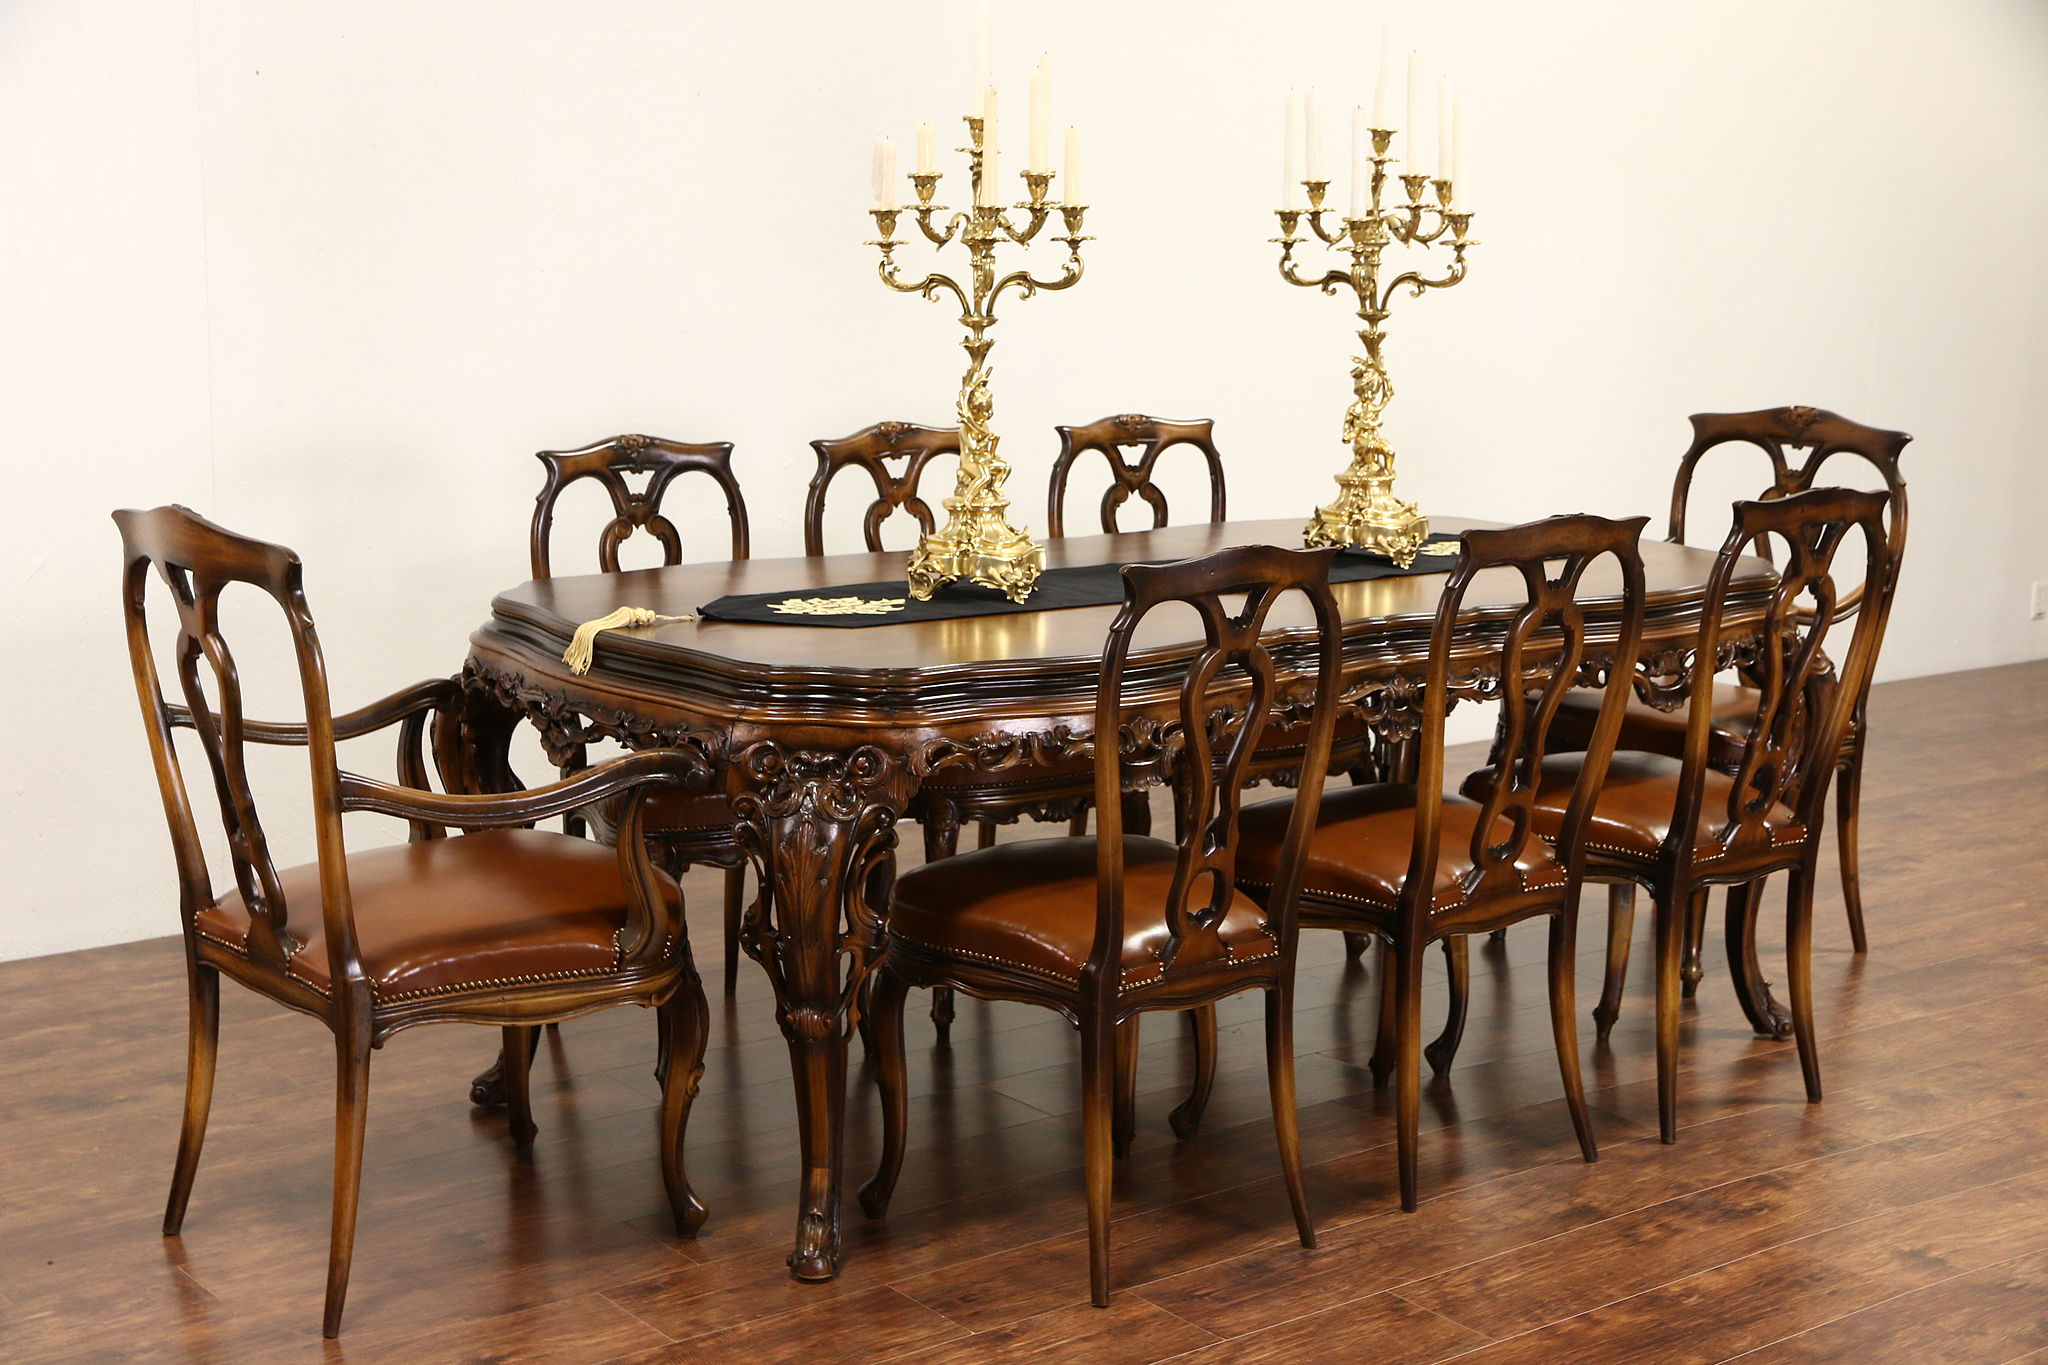 Sold Italian Baroque Carved 1930 S Vintage Dining Set Table 8 Leather Chairs Harp Gallery Antiques Furniture